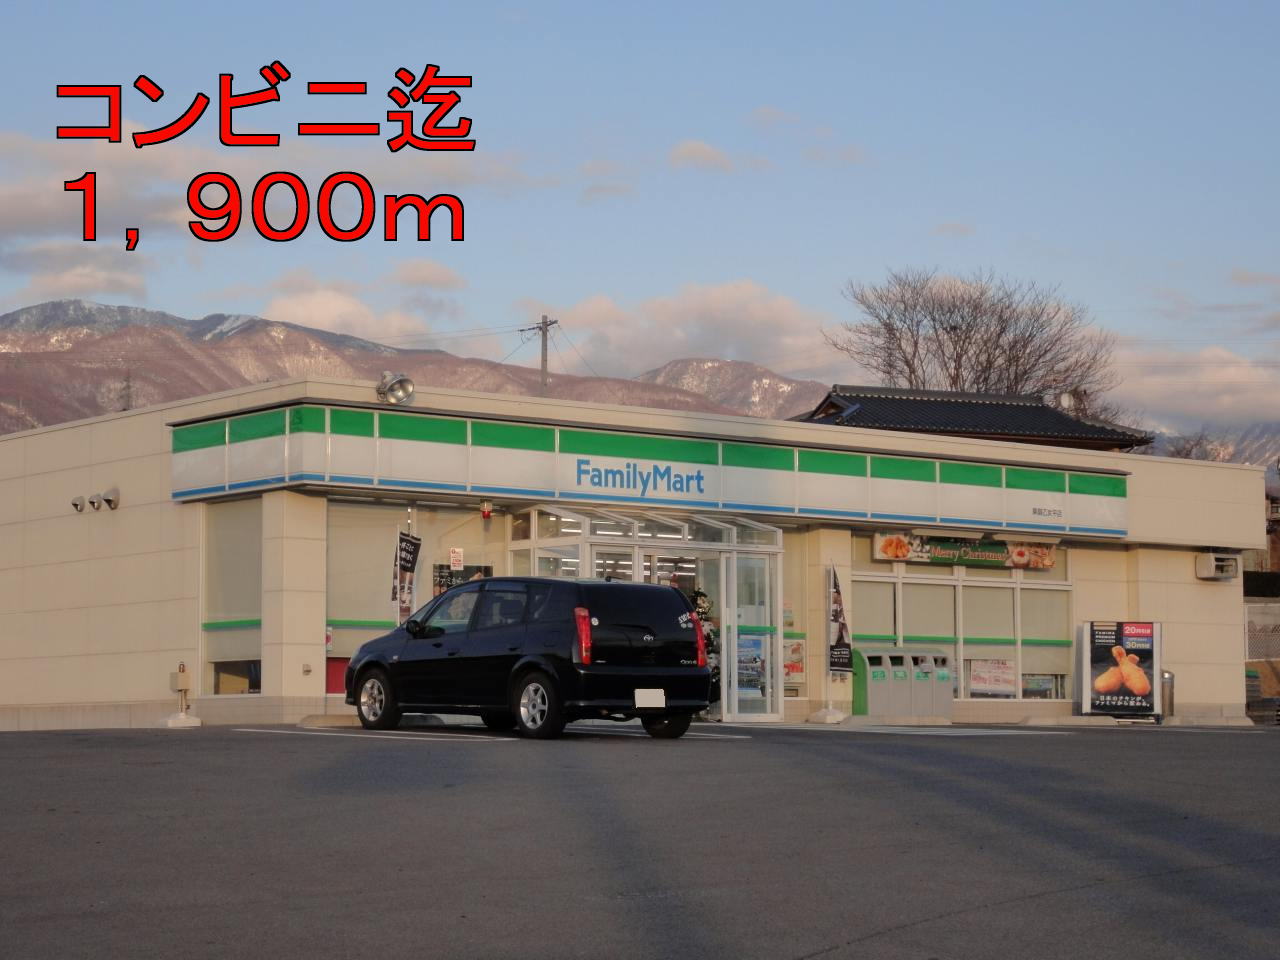 Convenience store. FamilyMart east your maiden Hiramise (convenience store) up to 1900m